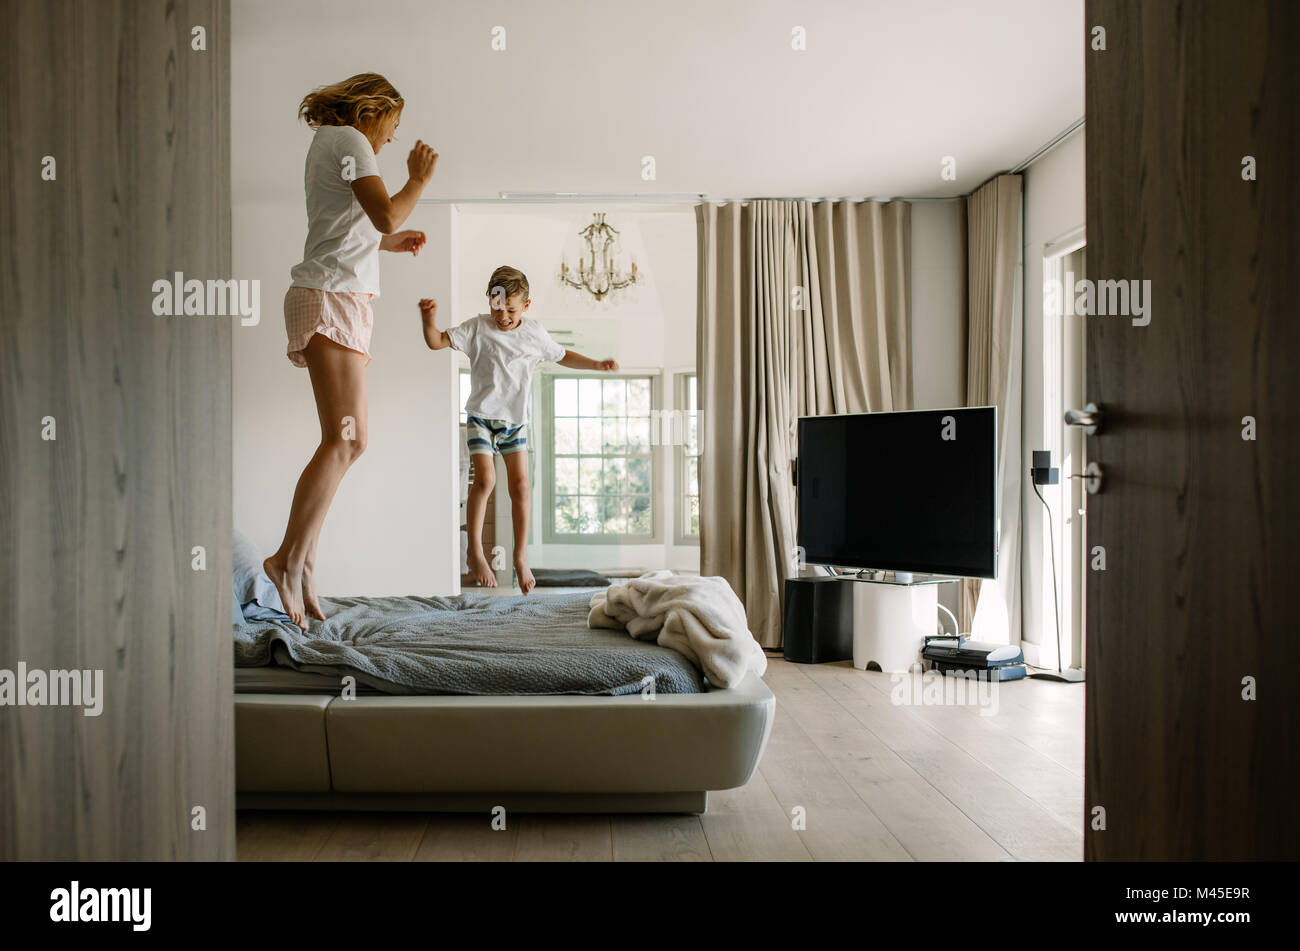 Young mother and her little son jumping on bed. Woman and little boy playing together and enjoying in bedroom. Stock Photo